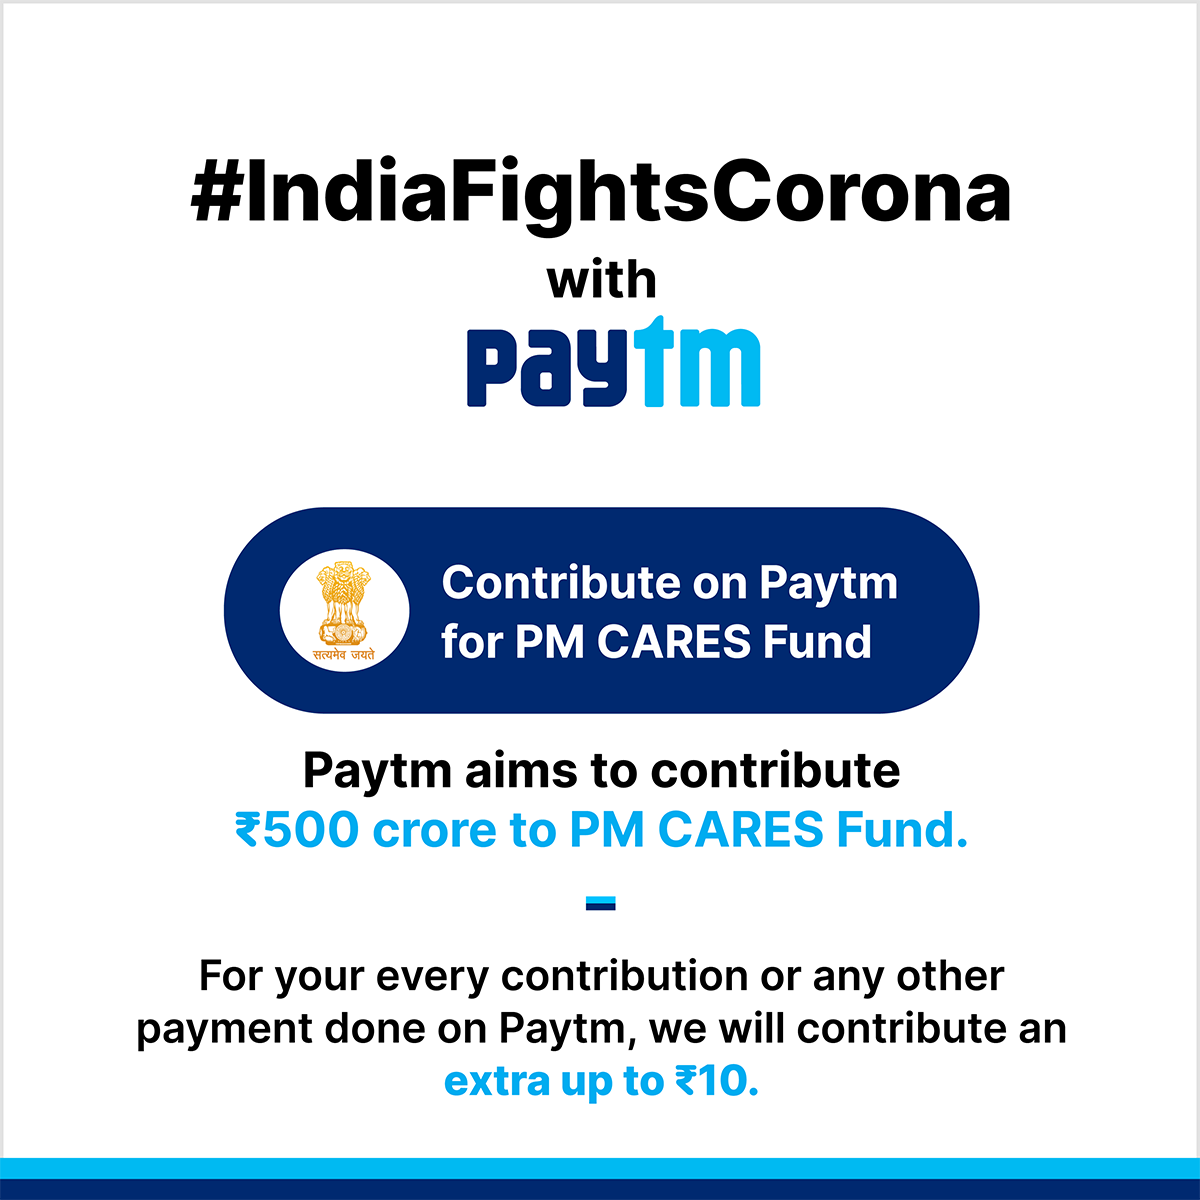 paytm-aims-to-contribute-rs-500-crore-to-pm-cares-fund